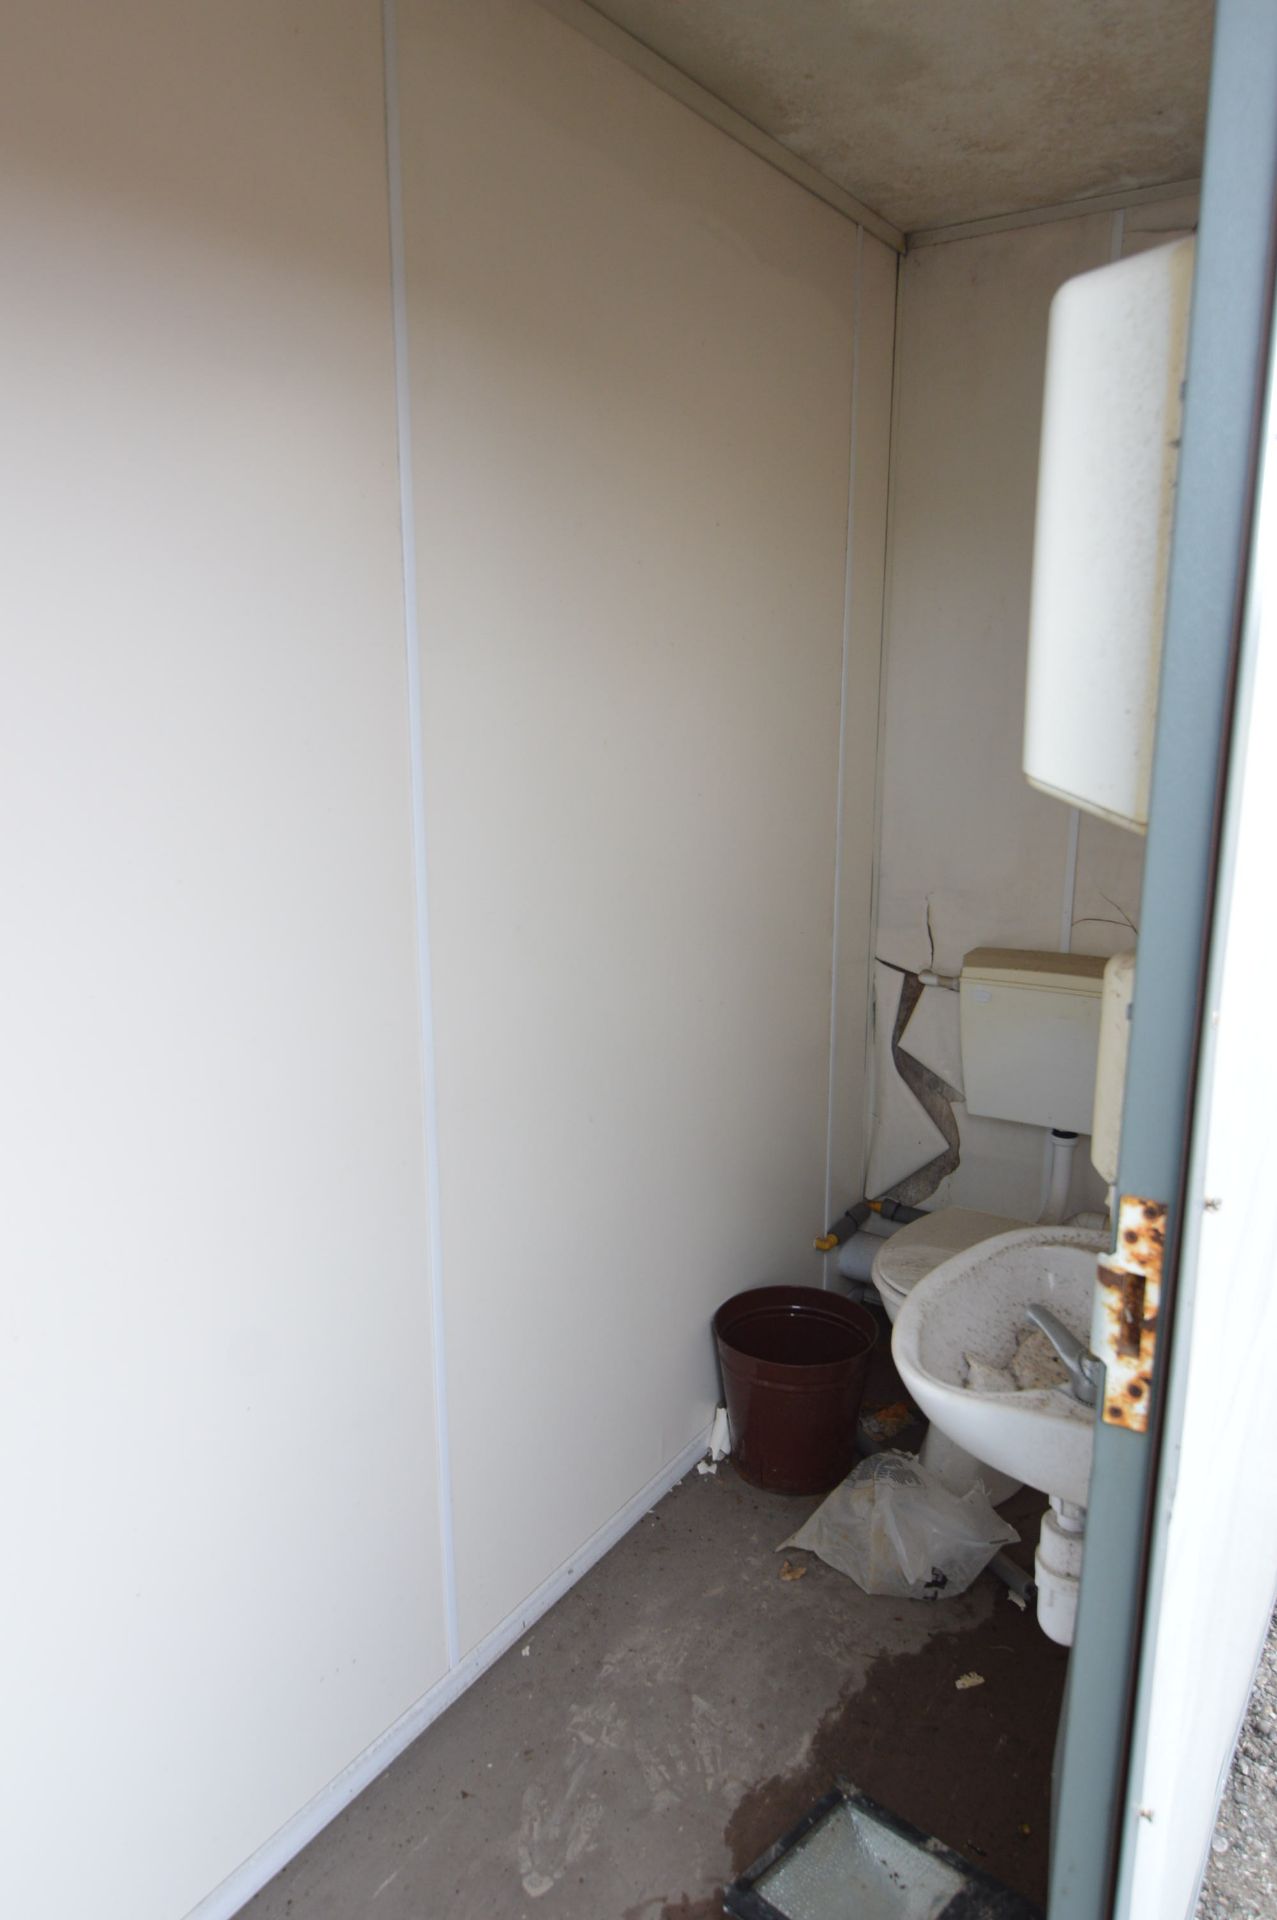 Gents & Ladies (Two Section) Portable Jackleg Toilet Unit, approx. 2.75m x 3.6m, NOTE 5%buyer’s - Image 3 of 4